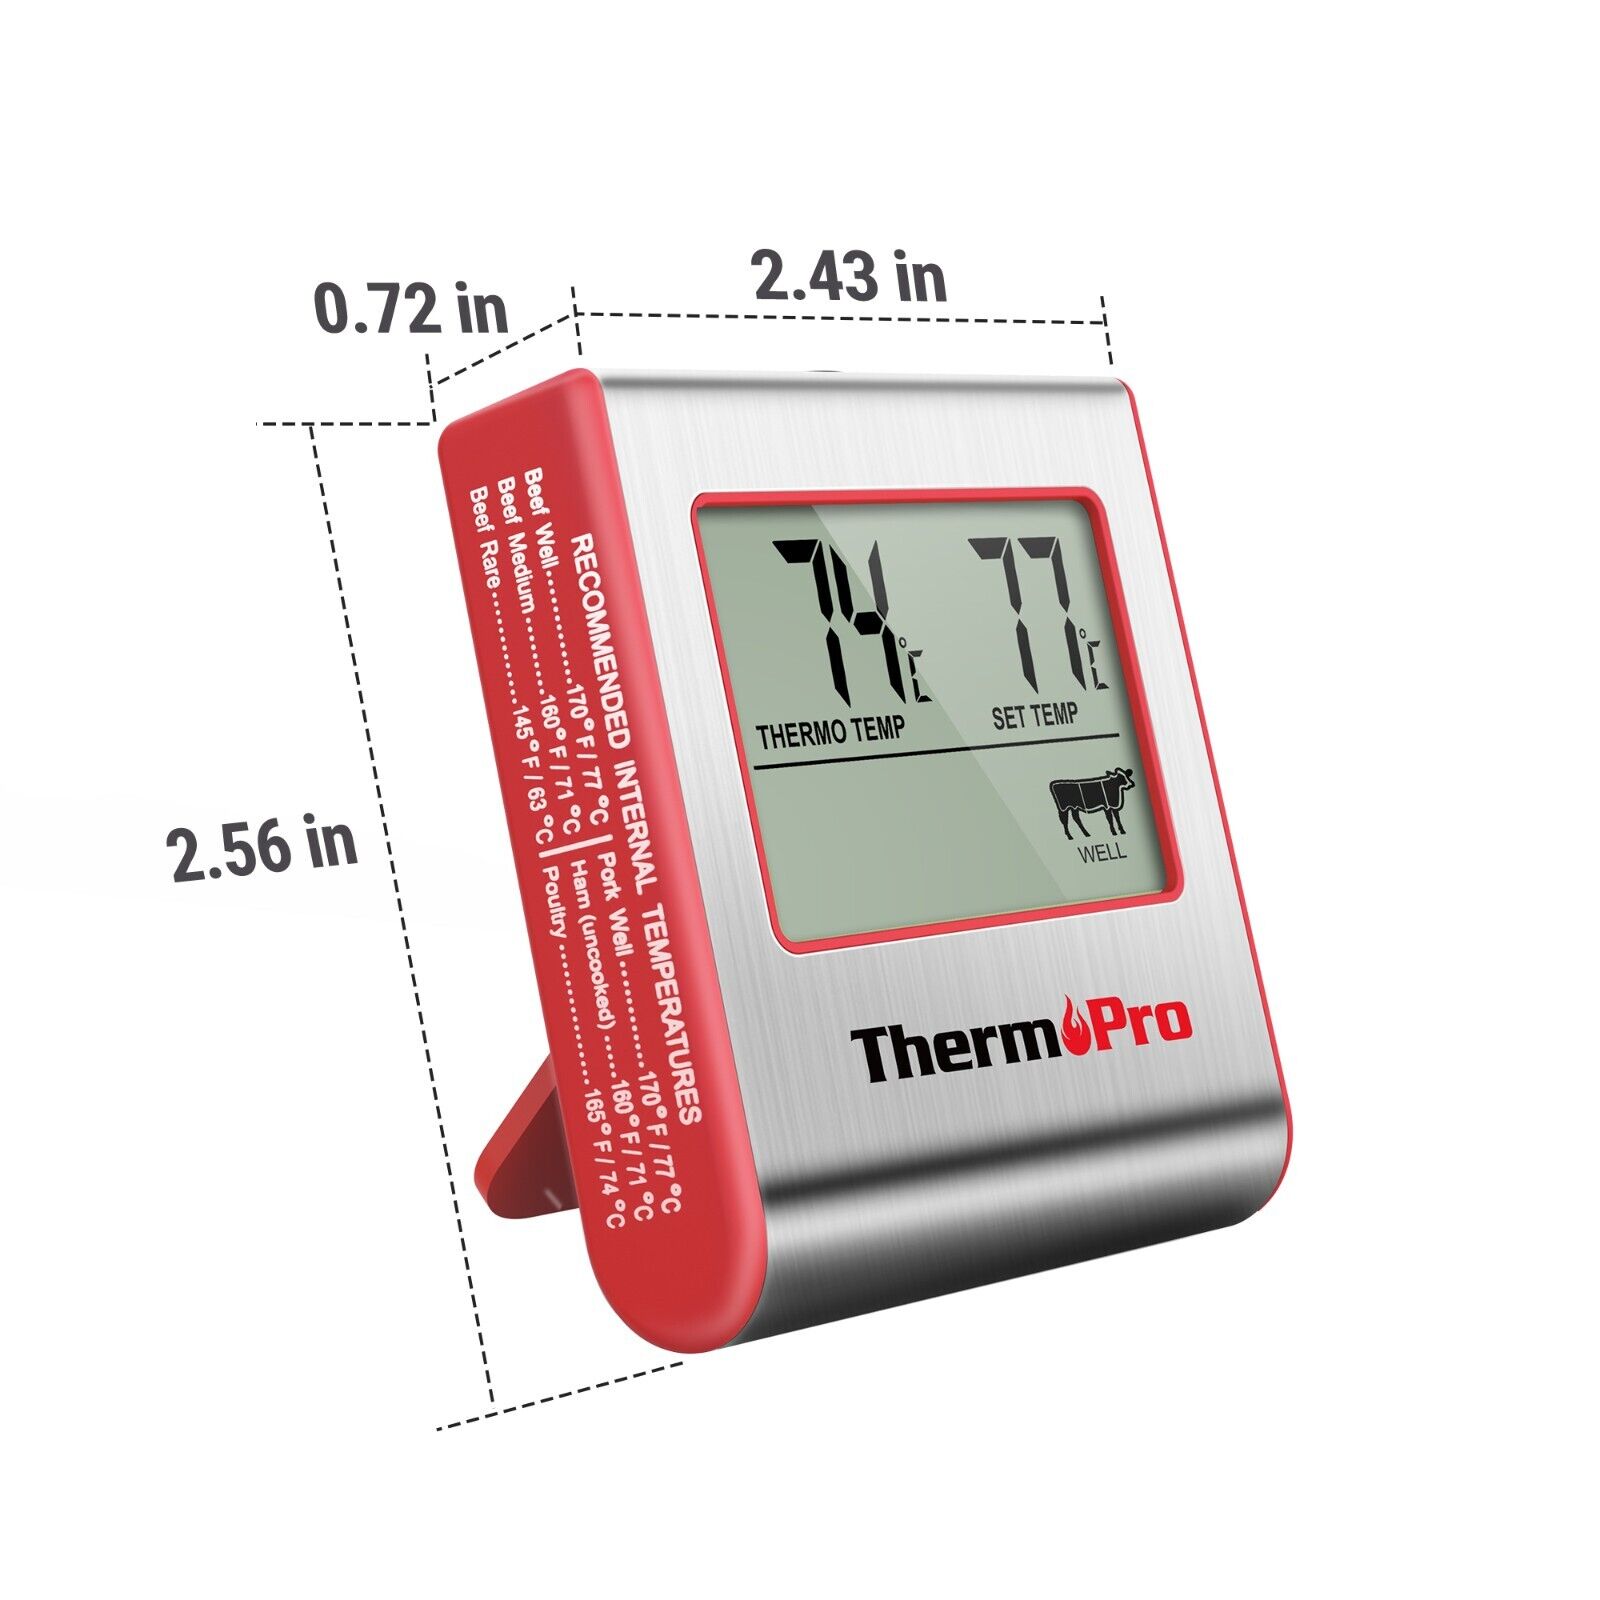 ThermoPro TP16W Digital Meat Thermometer for Cooking Smoker Oven, Large LCD ThermoPro TPP16W - фотография #14